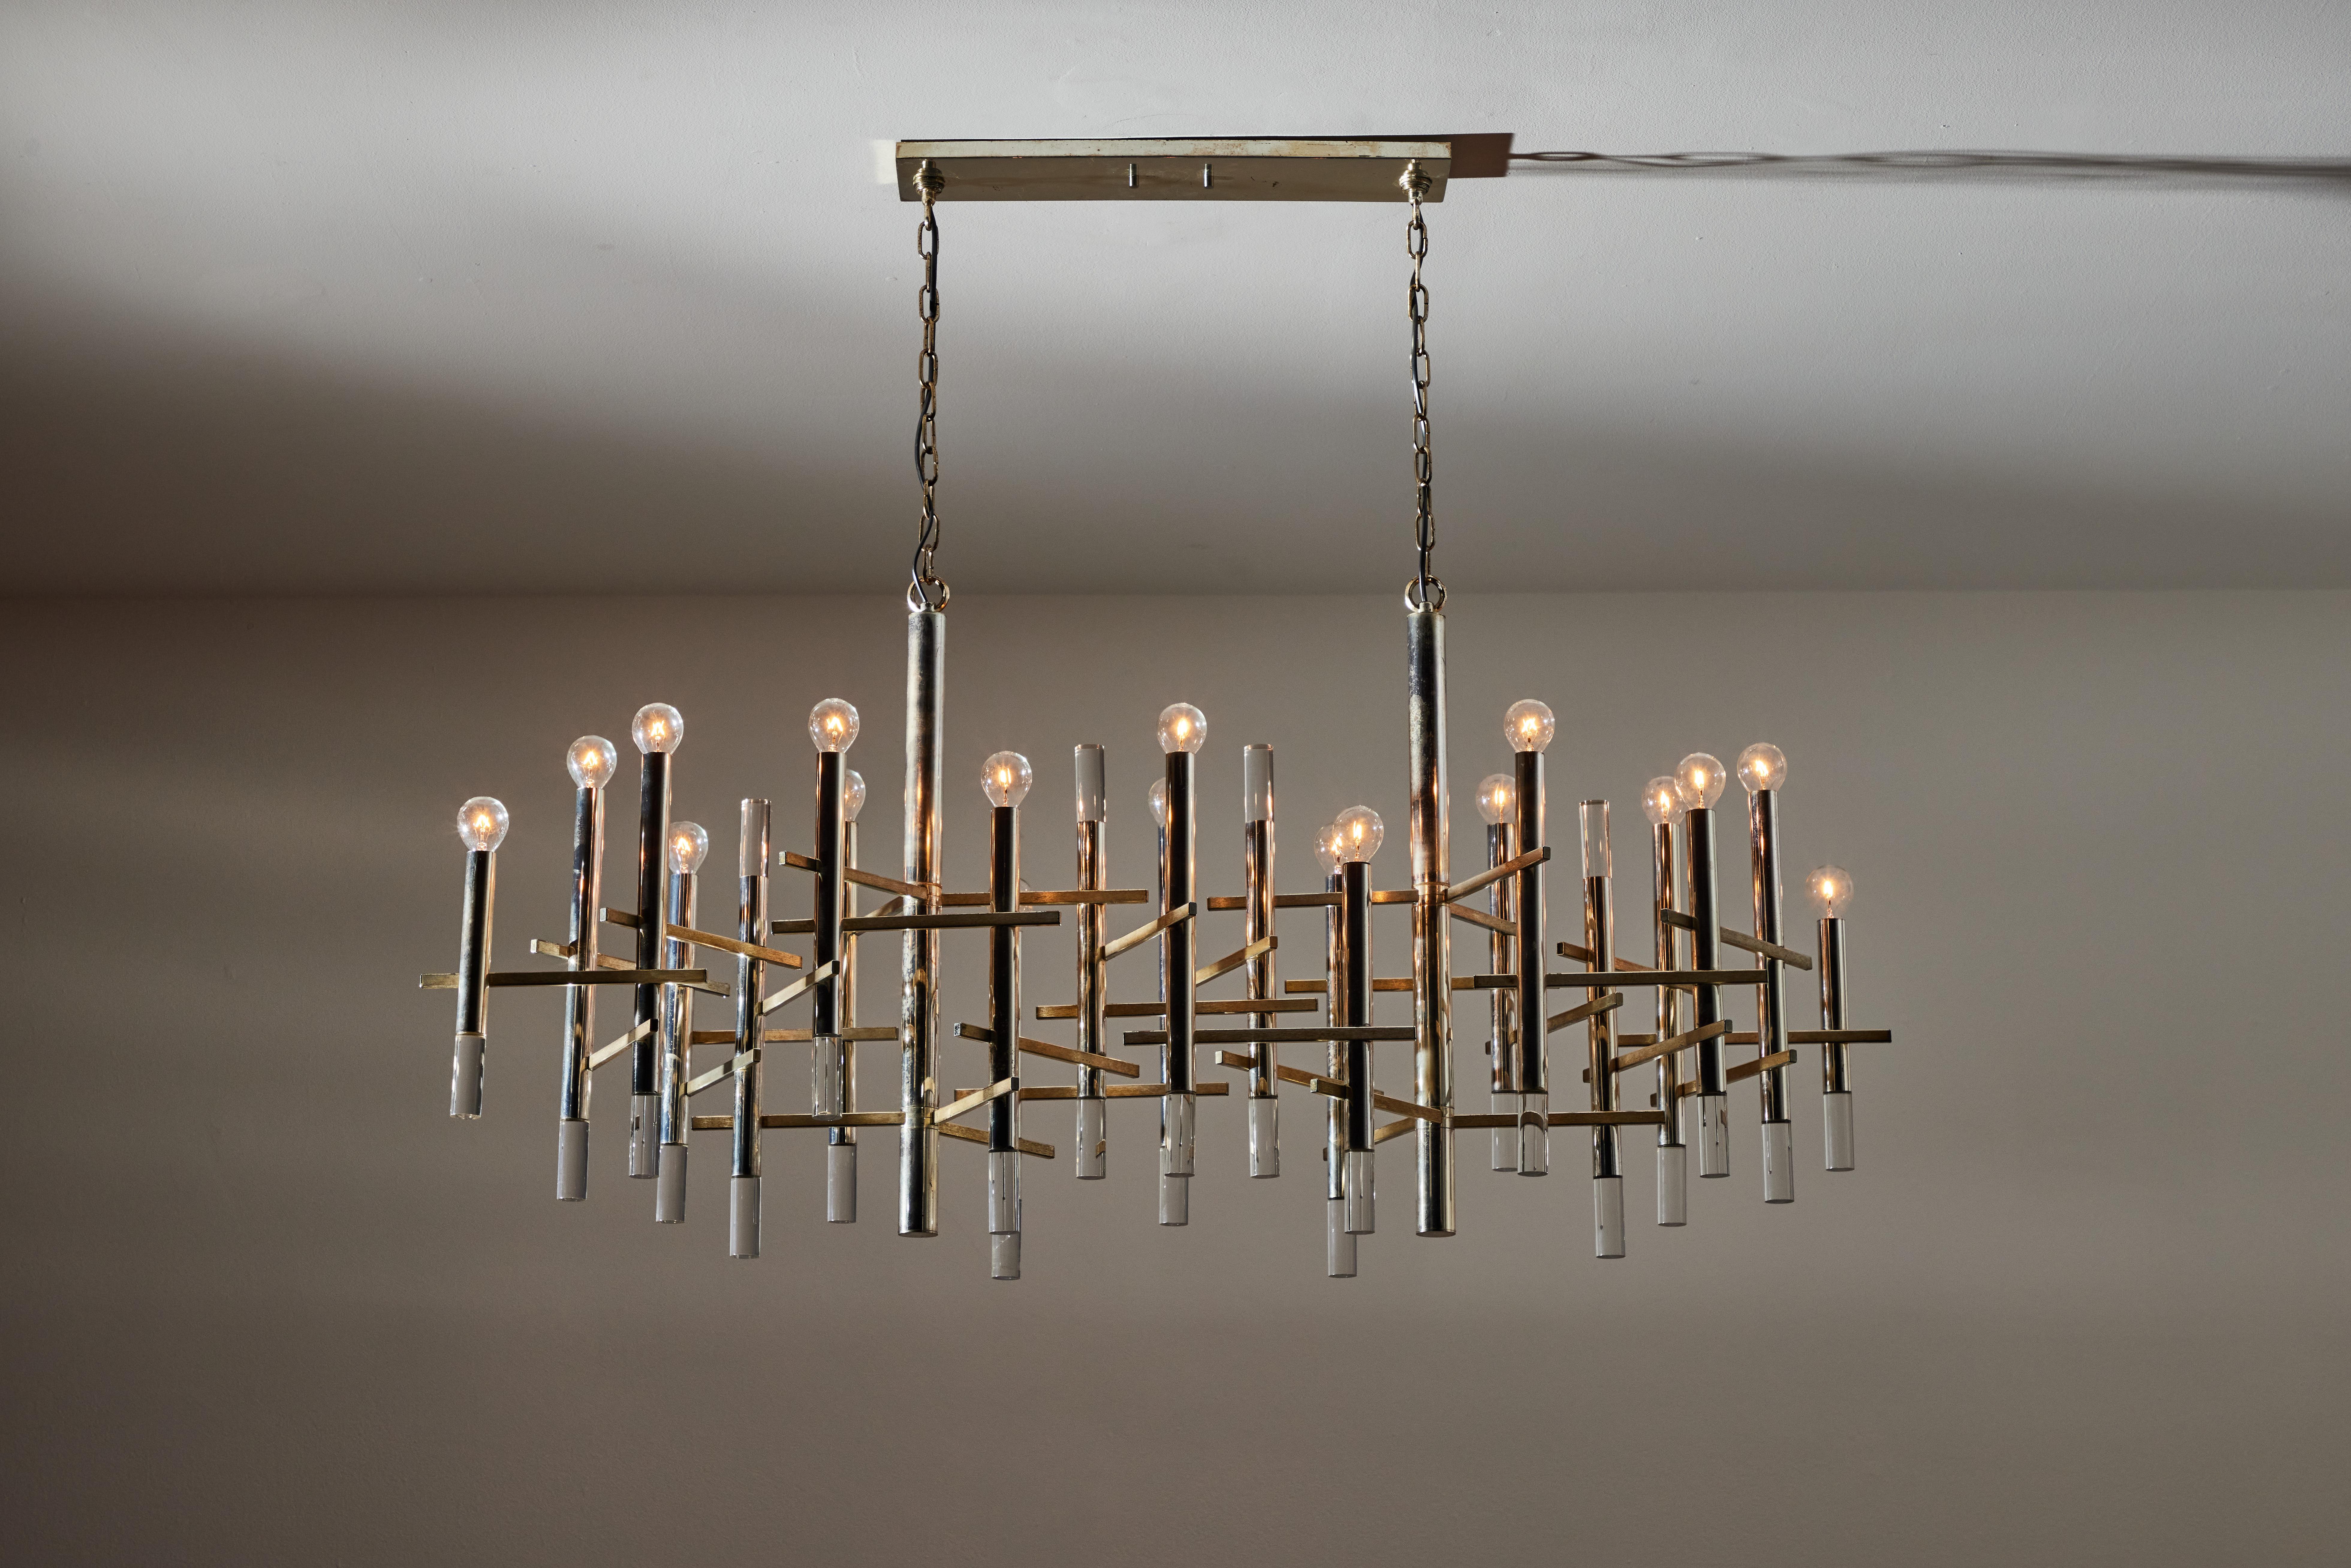 Rare large chandelier by Gaetano Sciolari. Designed and manufactured in Italy, circa 1960's. Brushed aluminum and polished nickel? original canopy. Wired for U.S. standards. We recommend eighteen E14 10w maximum bulbs. Bulbs not included.